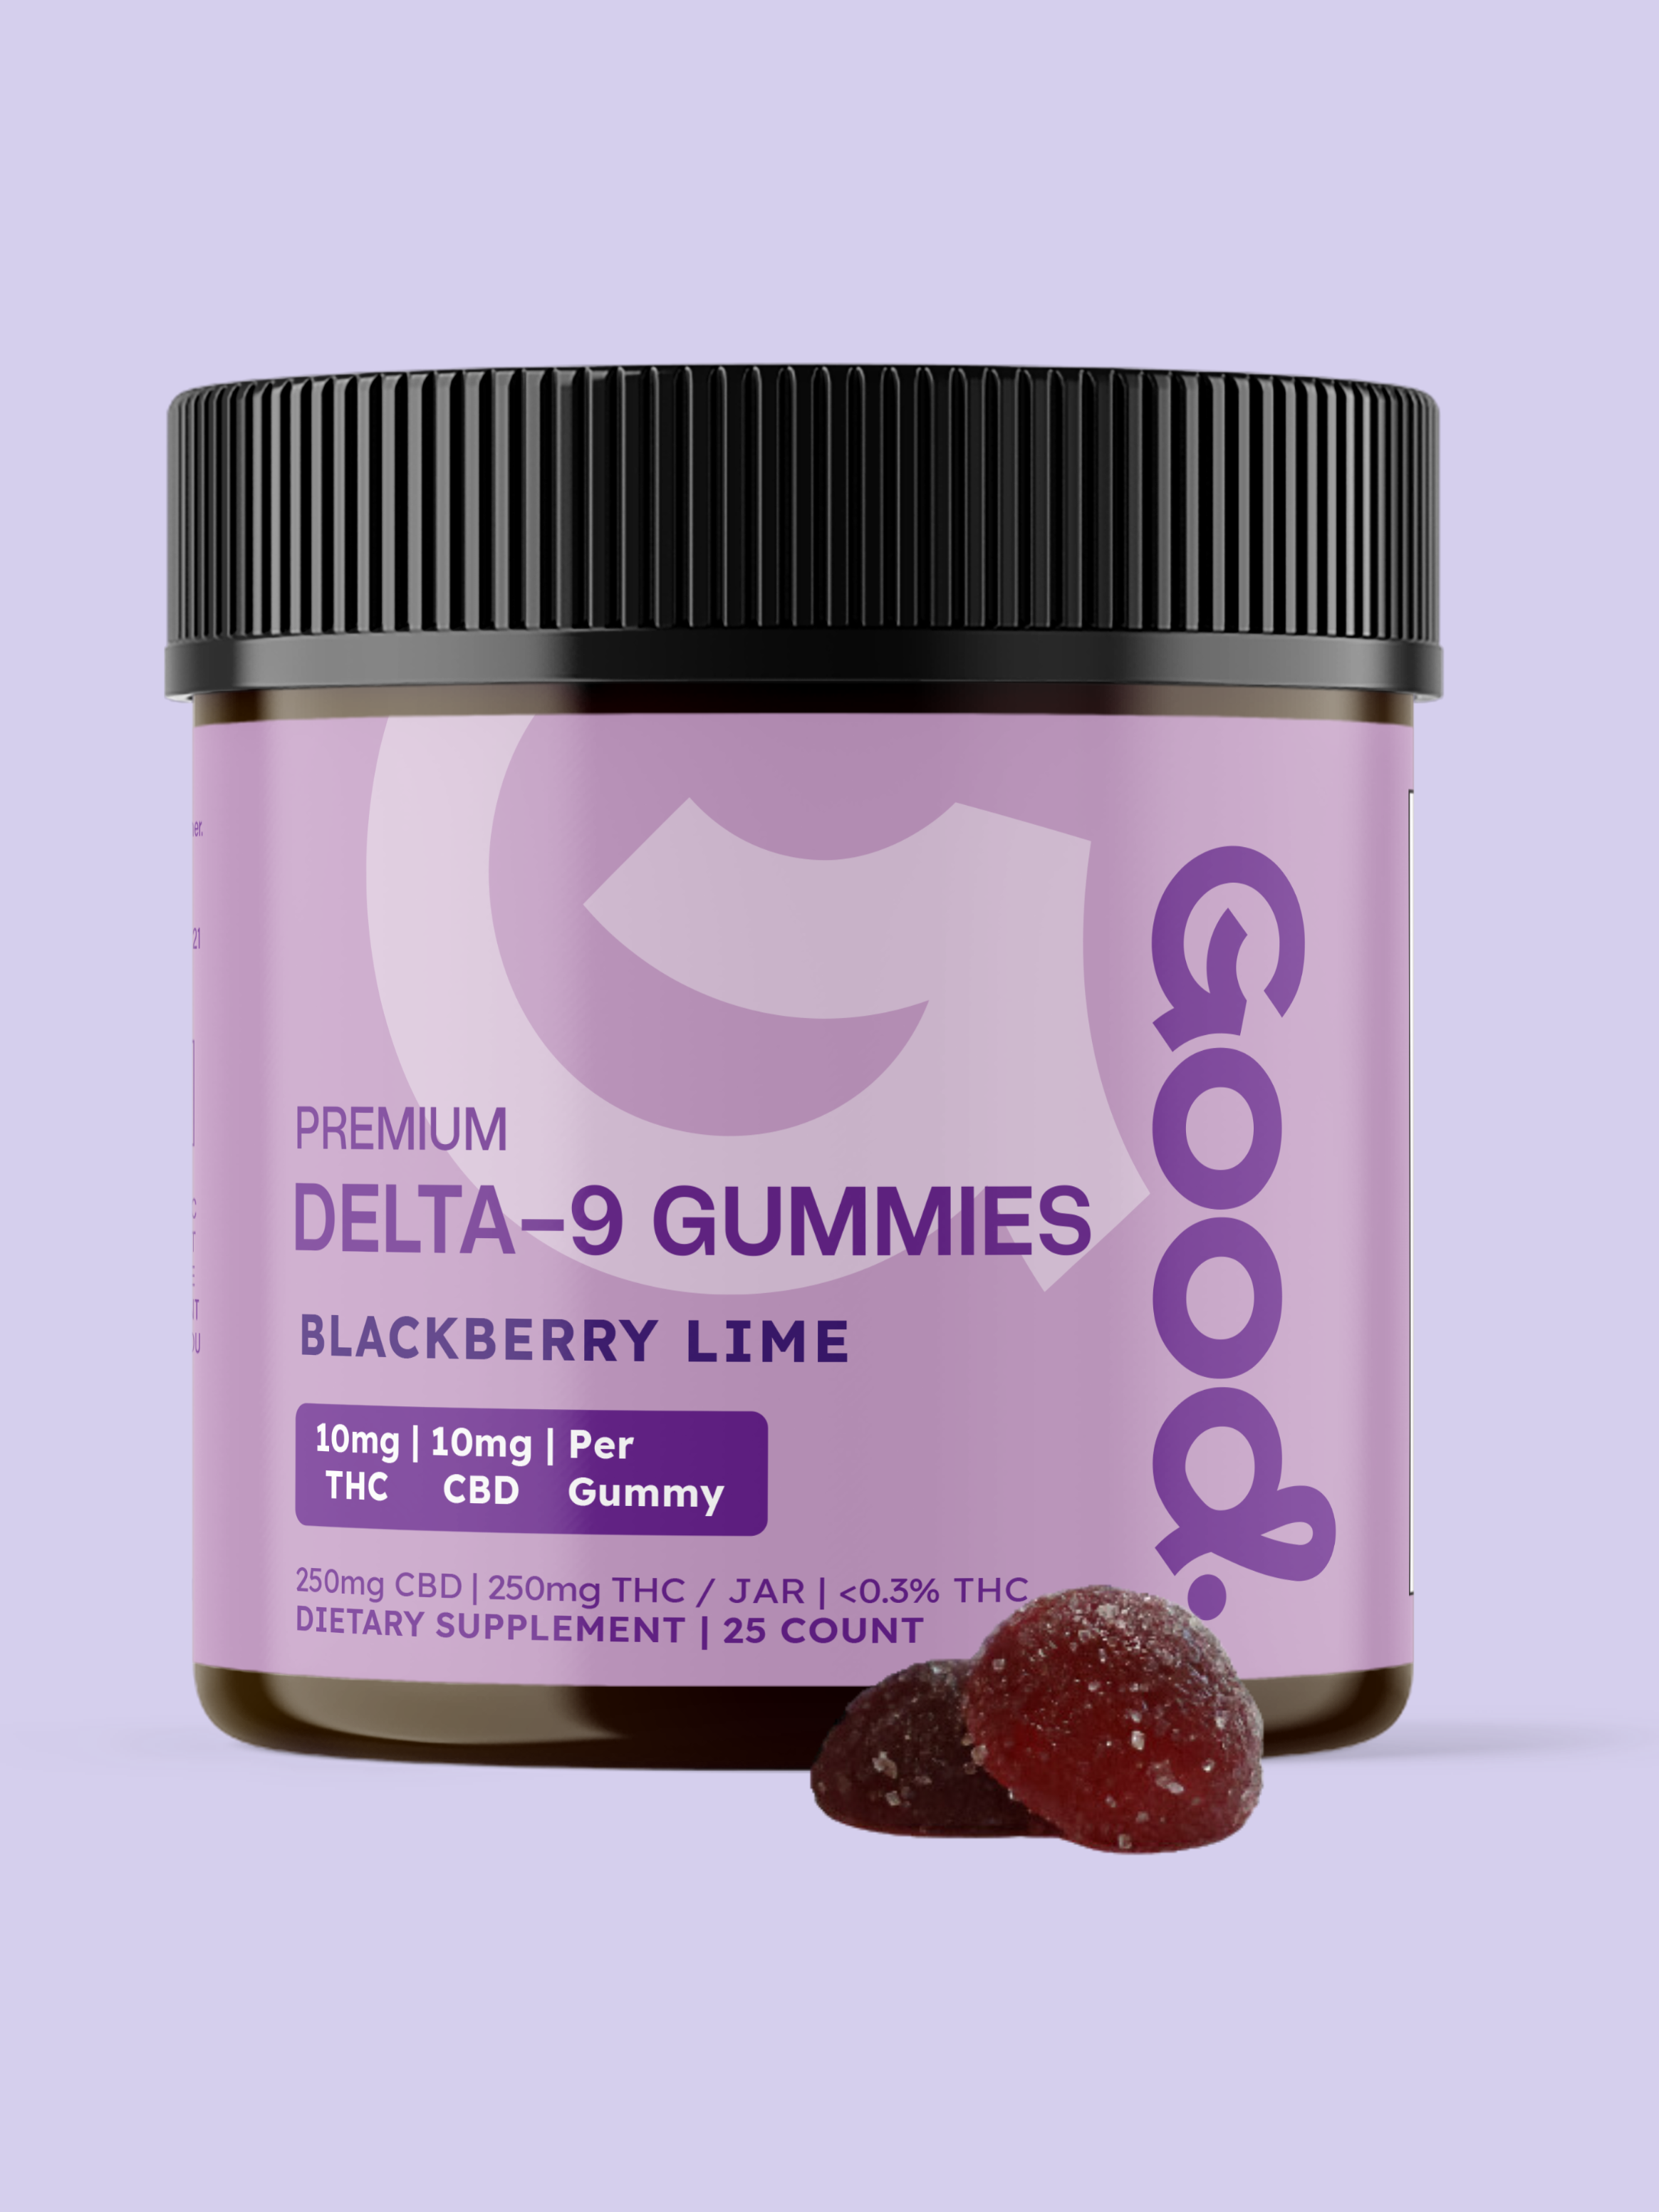 A jar of "Good" brand Delta-9 blackberry lime gummies with a dosage label, displayed against a plain purple background.